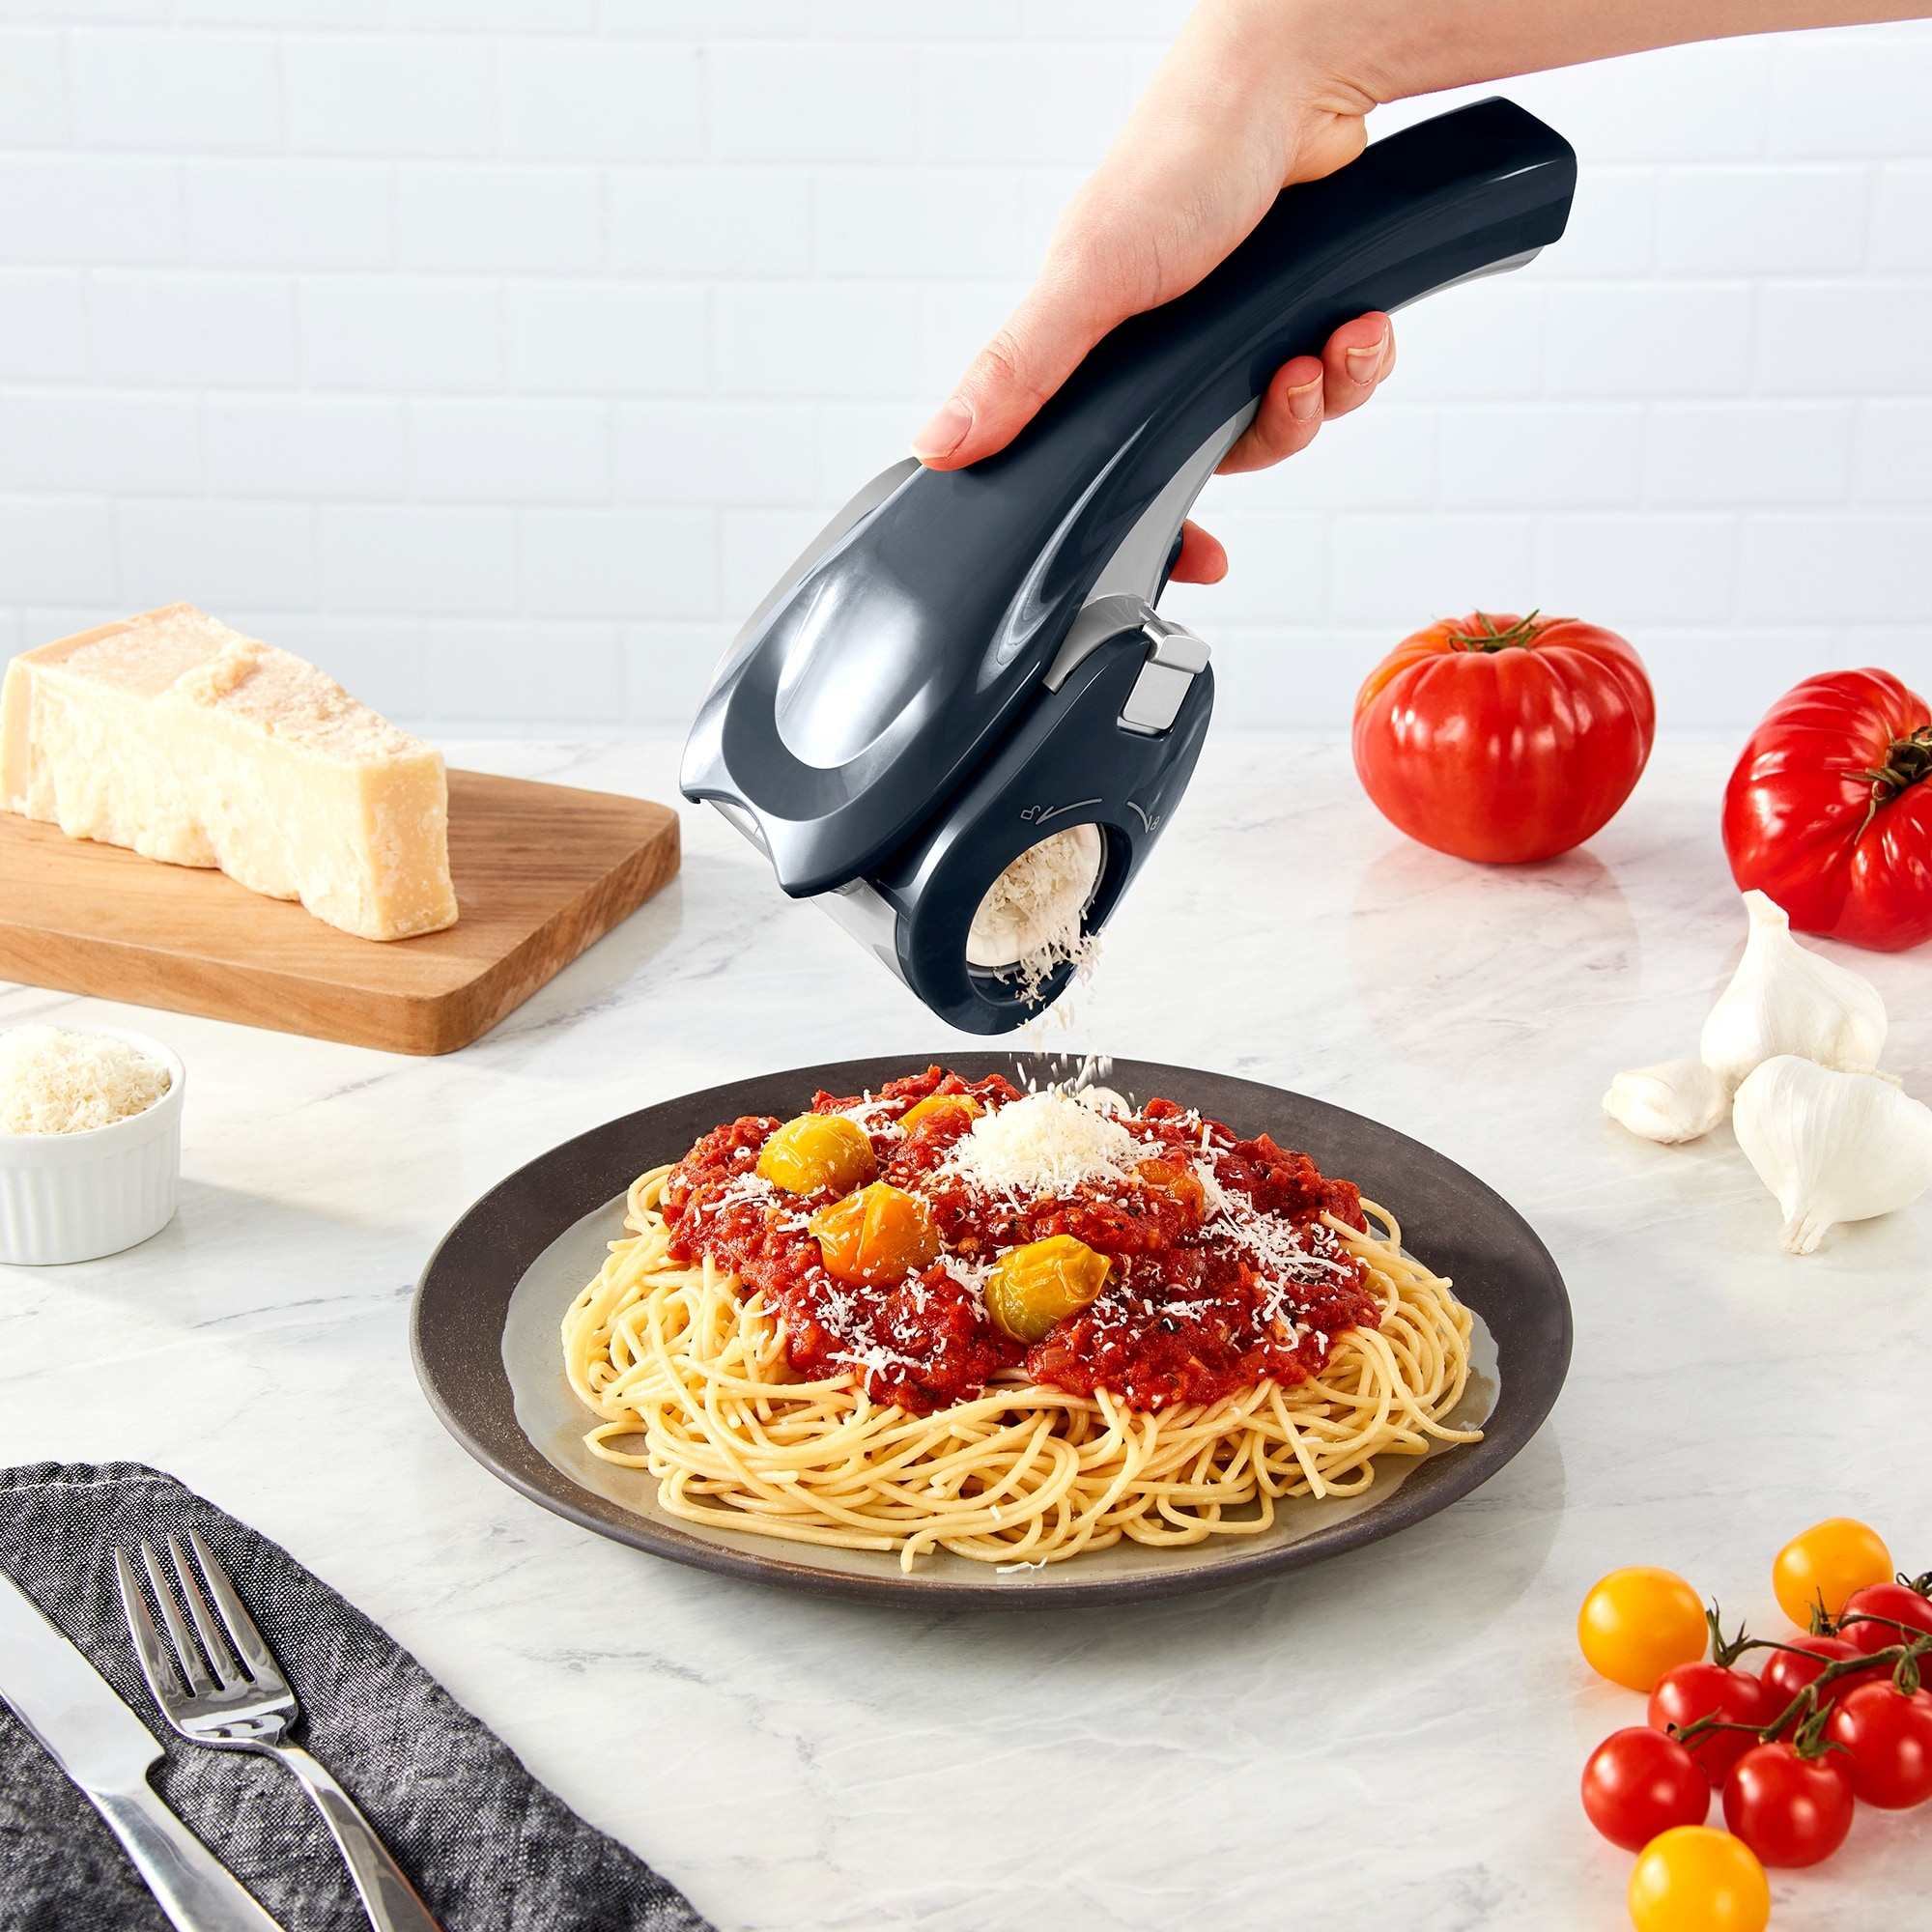 https://ak1.ostkcdn.com/images/products/is/images/direct/3a57b9567f5a9d2fbf4f0e69caf076a41708b600/Rechargeable-Electric-Rotary-Grater.jpg